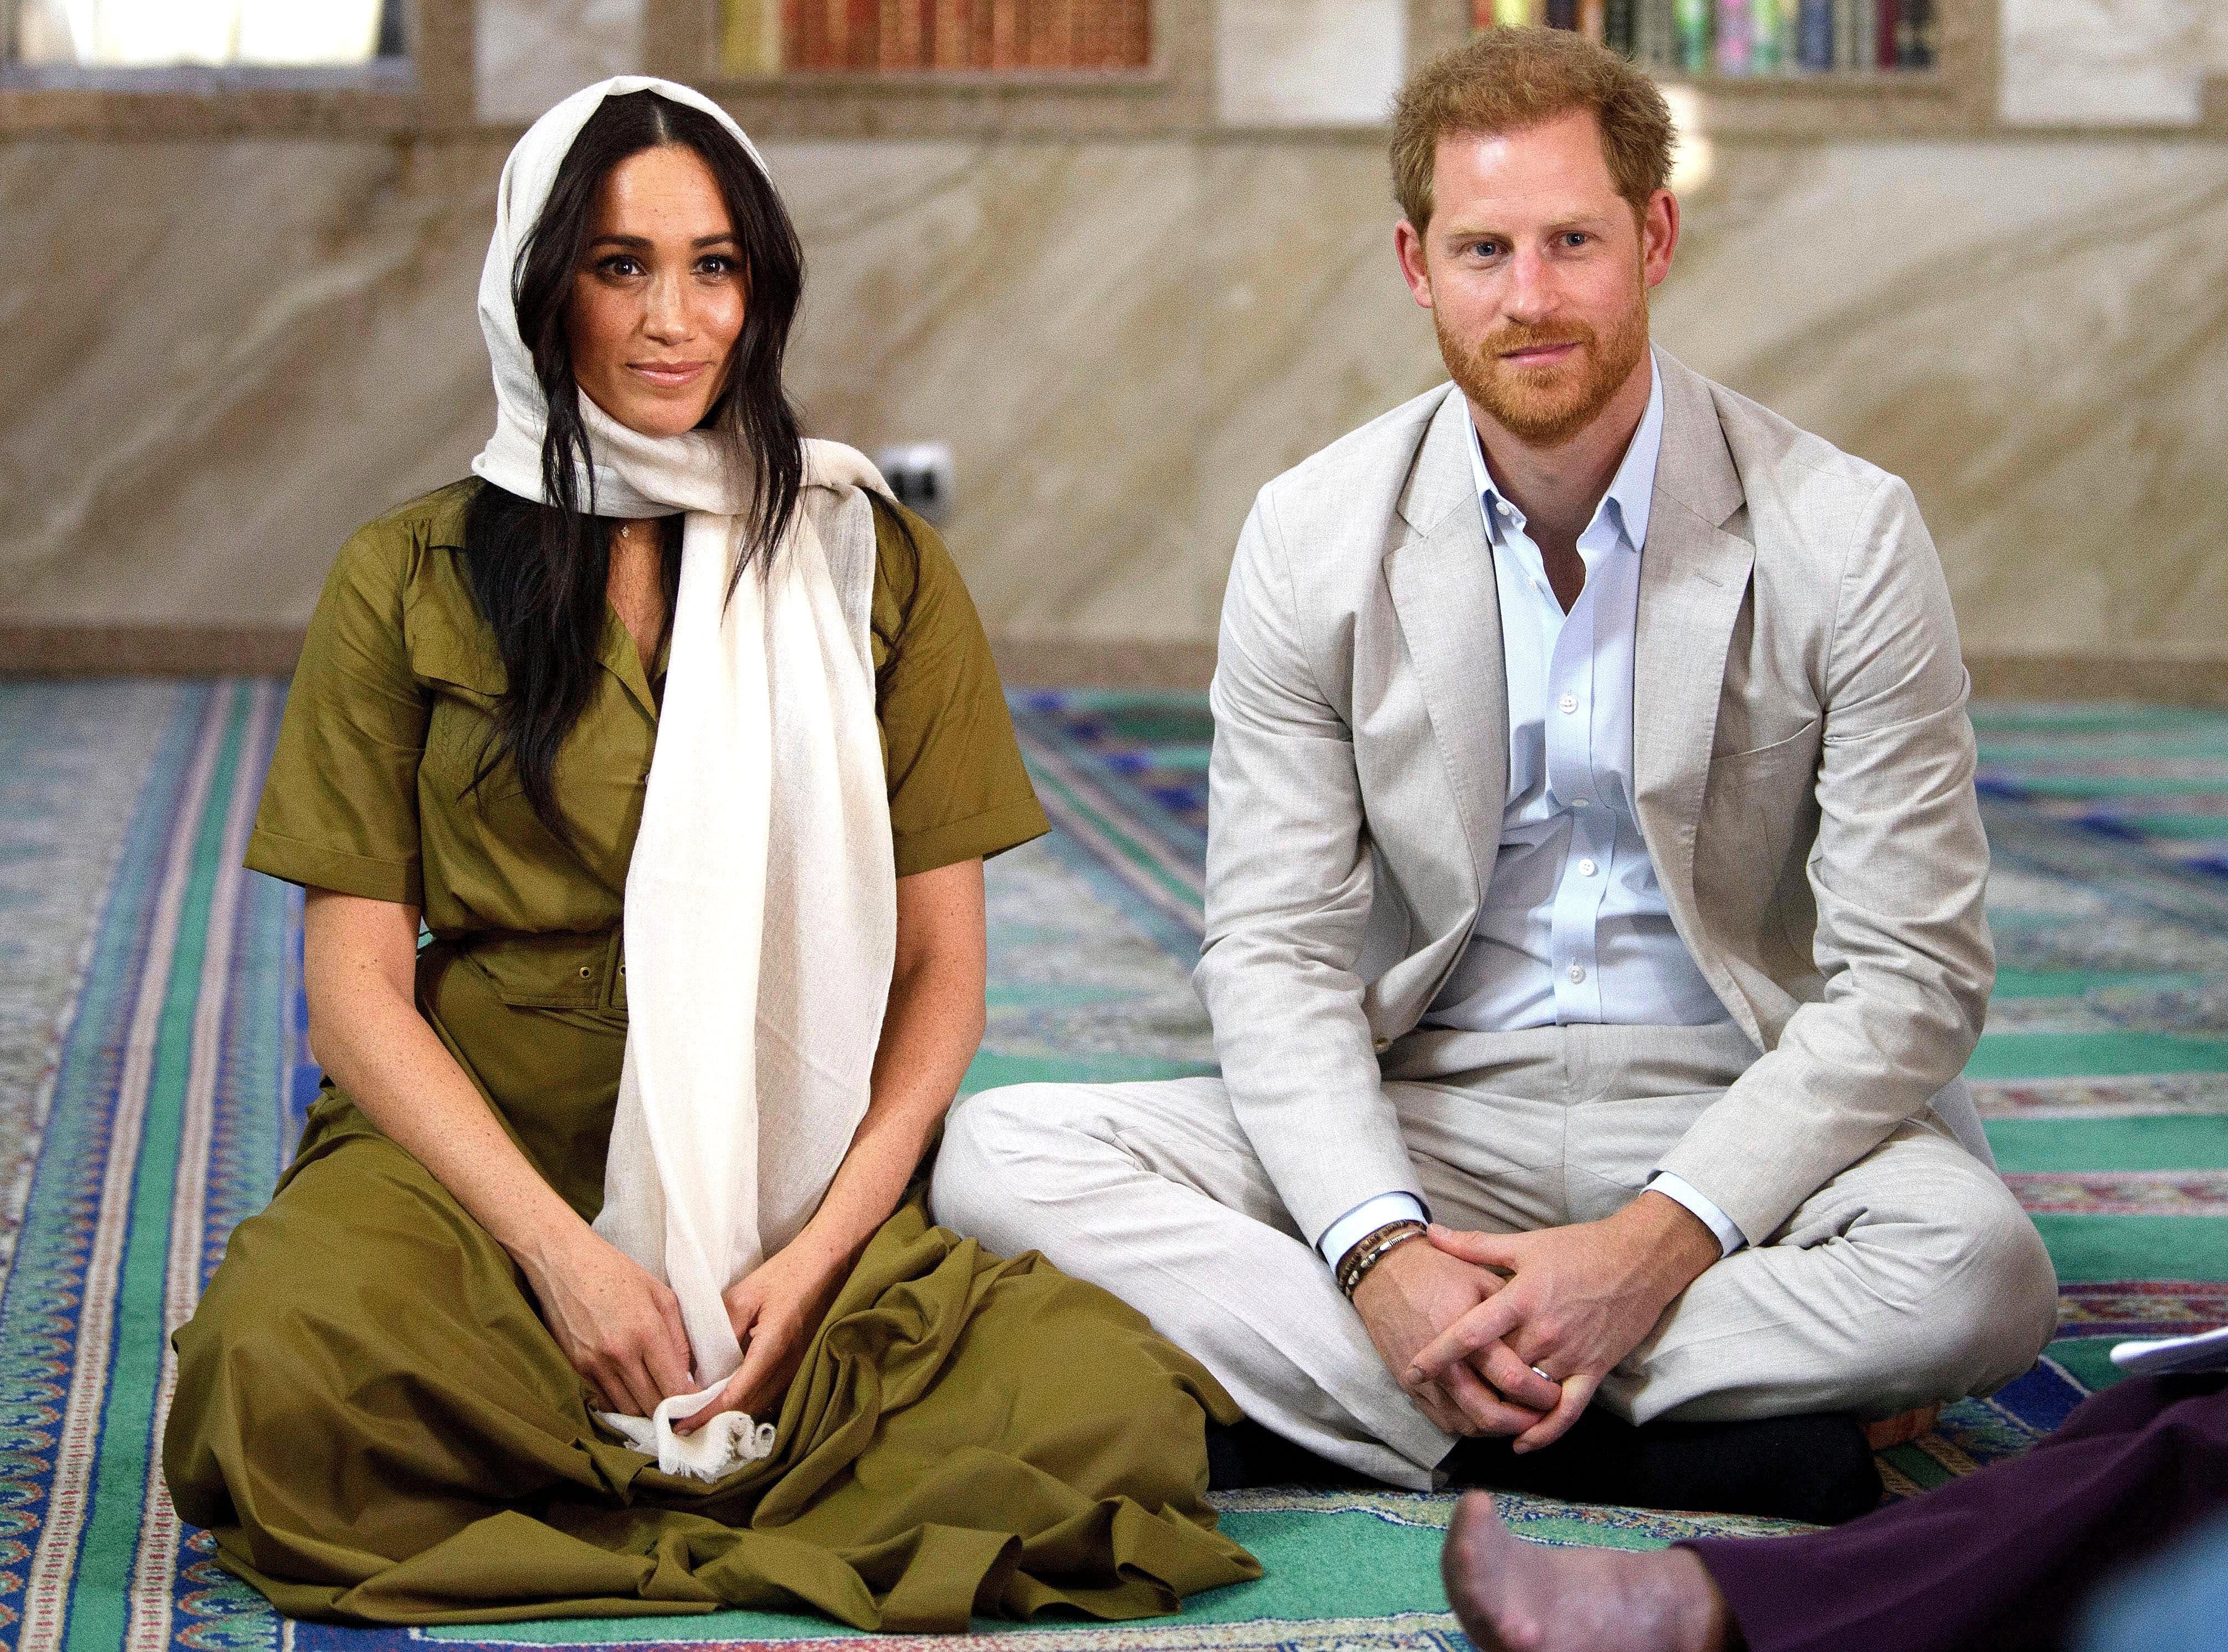 Meghan Markle and Prince Harry in the Auwal Mosque during their royal tour of South African on September 24, 2019 | Photo: Getty Images